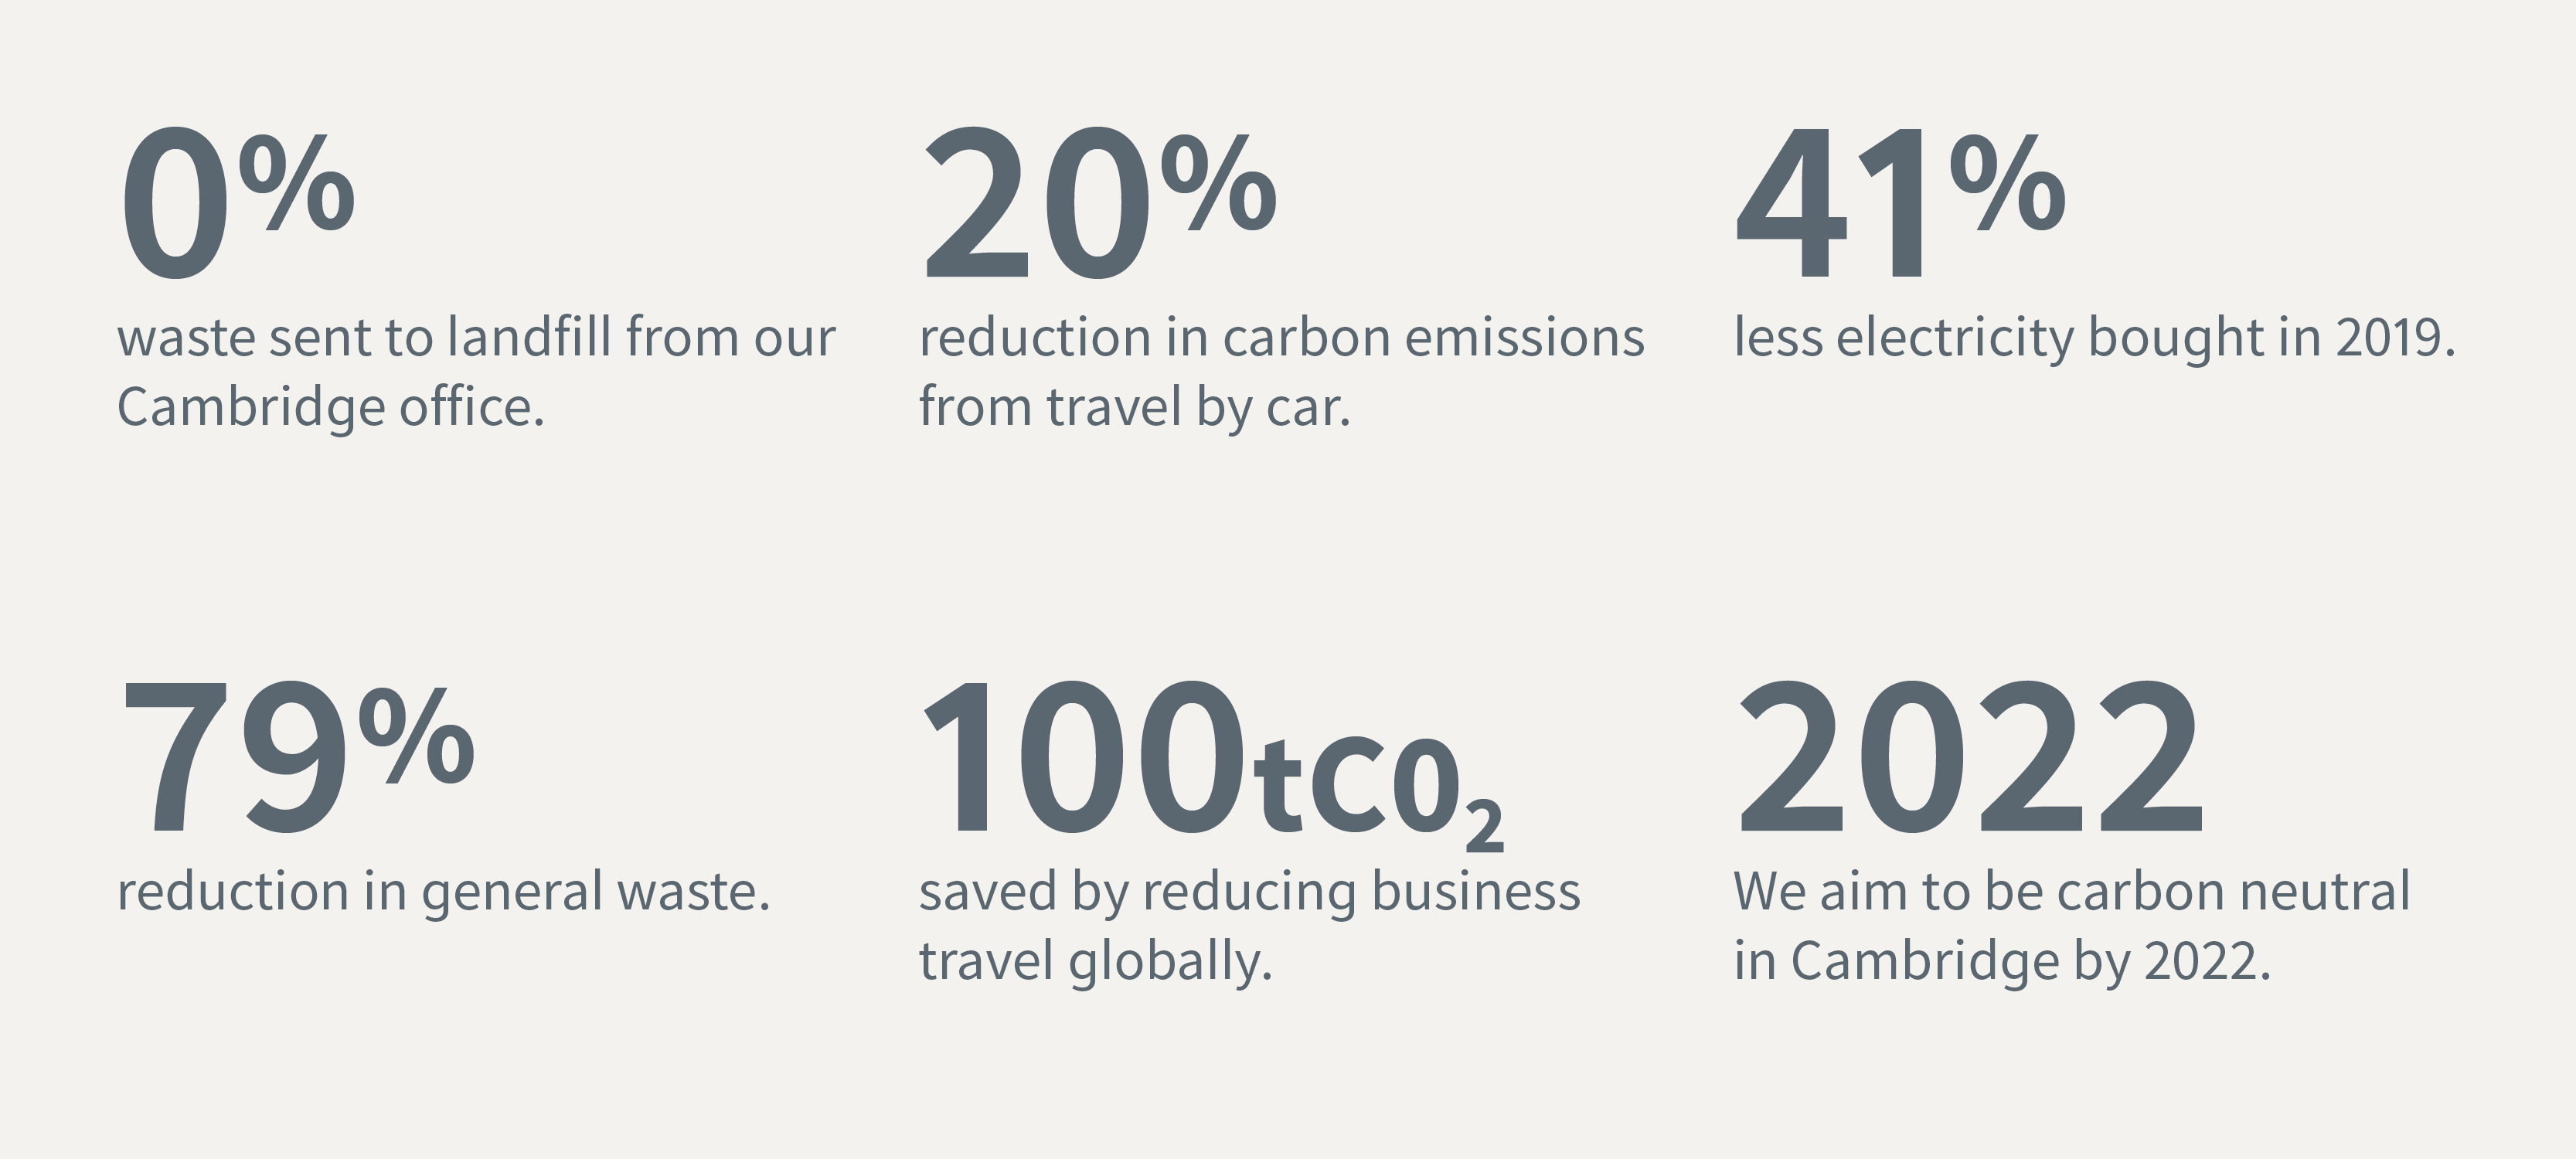 0% waste sent to landfill from our Cambridge office. 20% reduction in carbon emissions from travel by car. 41% less electricity bought in 2019. 79% reduction in general waste. 100tC02 saved by reducing business travel globally. We aim to be carbon neutral